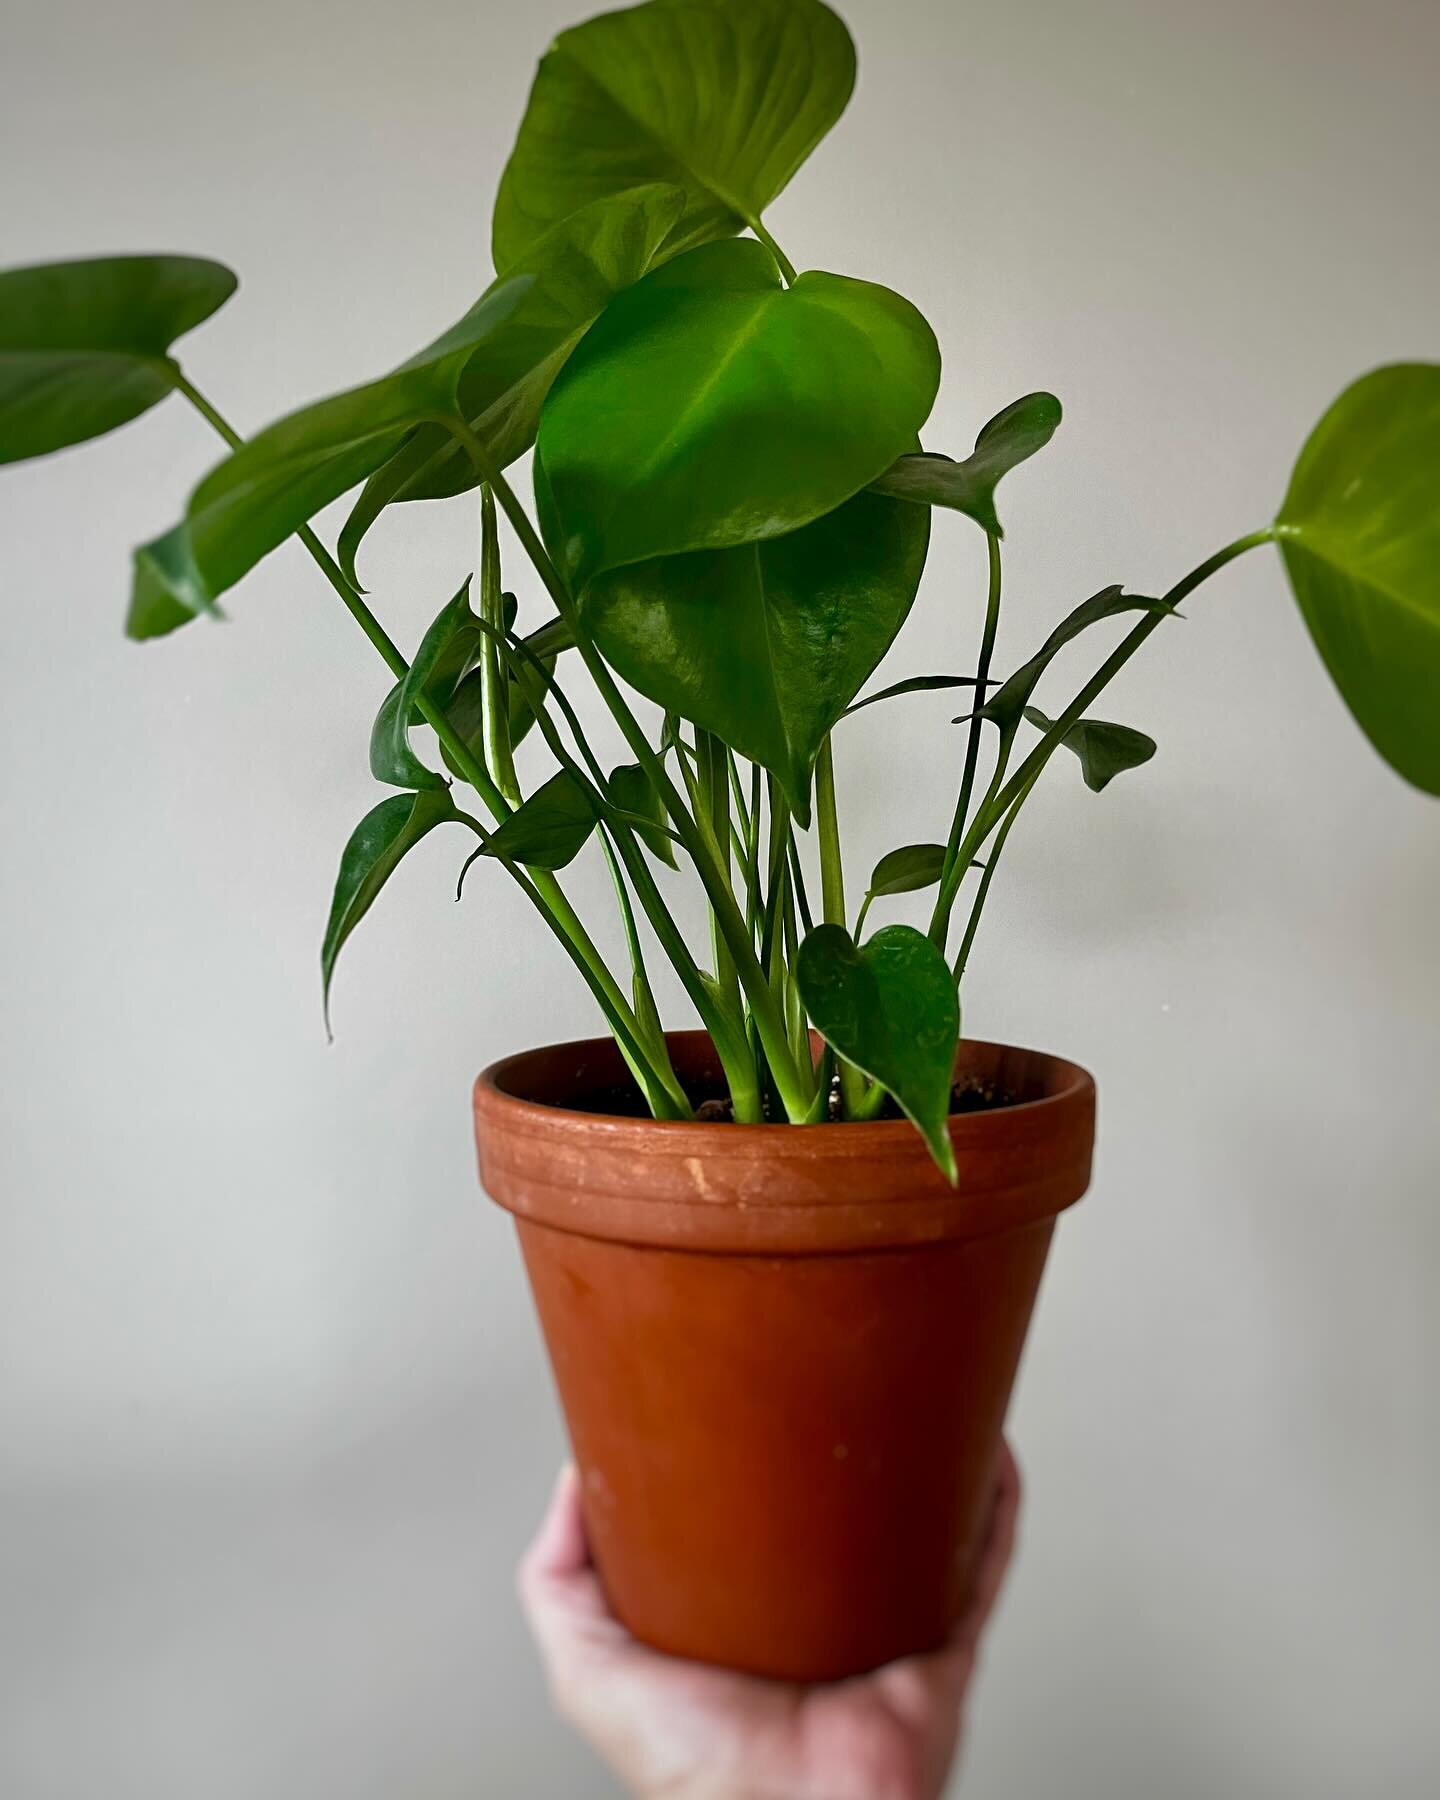 For the last few years, I&rsquo;ve had this love-hate relationship with this guy, the Monstera Deliciosa. A few weeks ago, I decided to give that relationship a chance again. I bought this little one over at @terraathome, and so far, he&rsquo;s doing